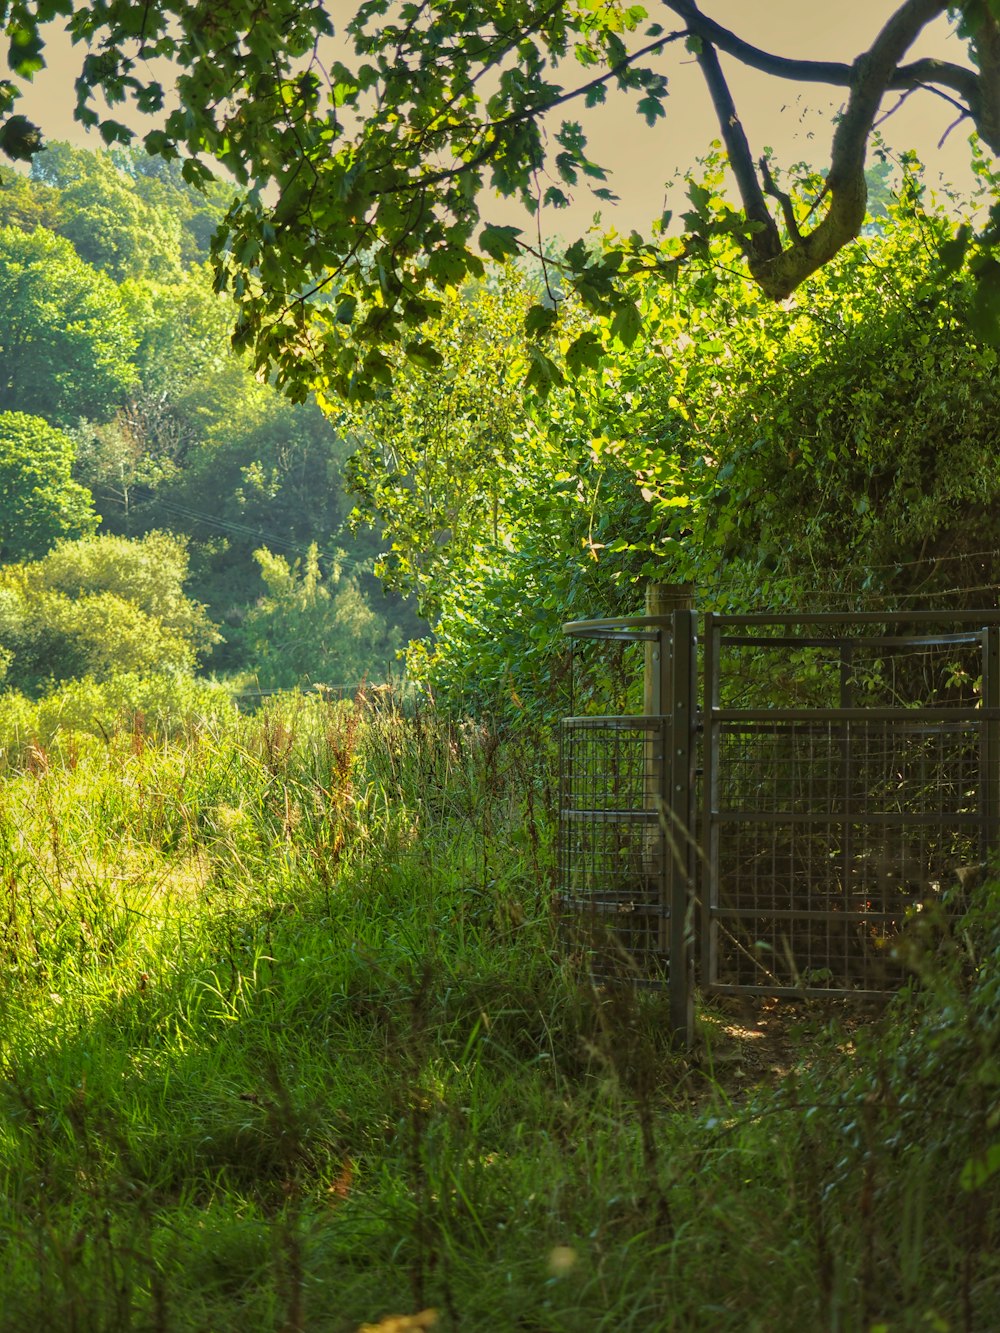 a gate in the middle of a lush green field